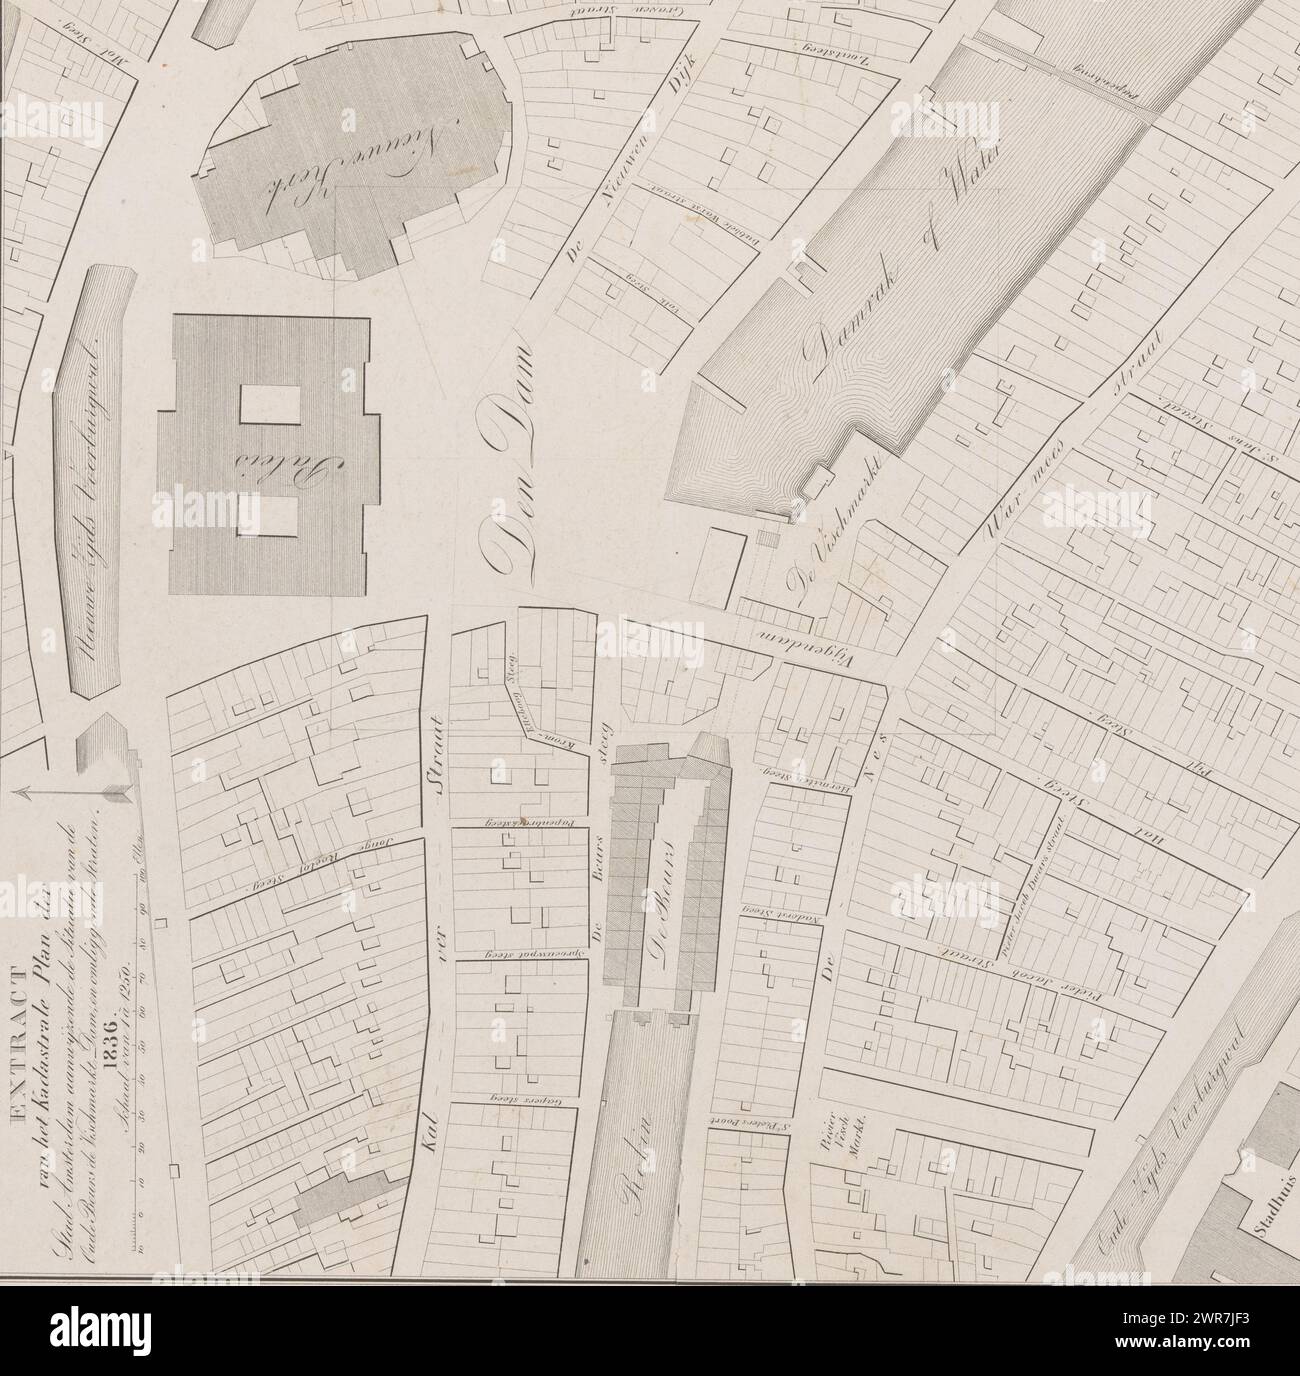 Map of Dam Square and surroundings, in Amsterdam, Extract of the cadastral plan of the city of Amsterdam showing the situation of the Old Exchange, the Vischmarkt, Dam Square, and surrounding streets (title on object), print maker: anonymous, printer: Desguerrois & Co., 1836, paper, height 450 mm × width 360 mm, print Stock Photo